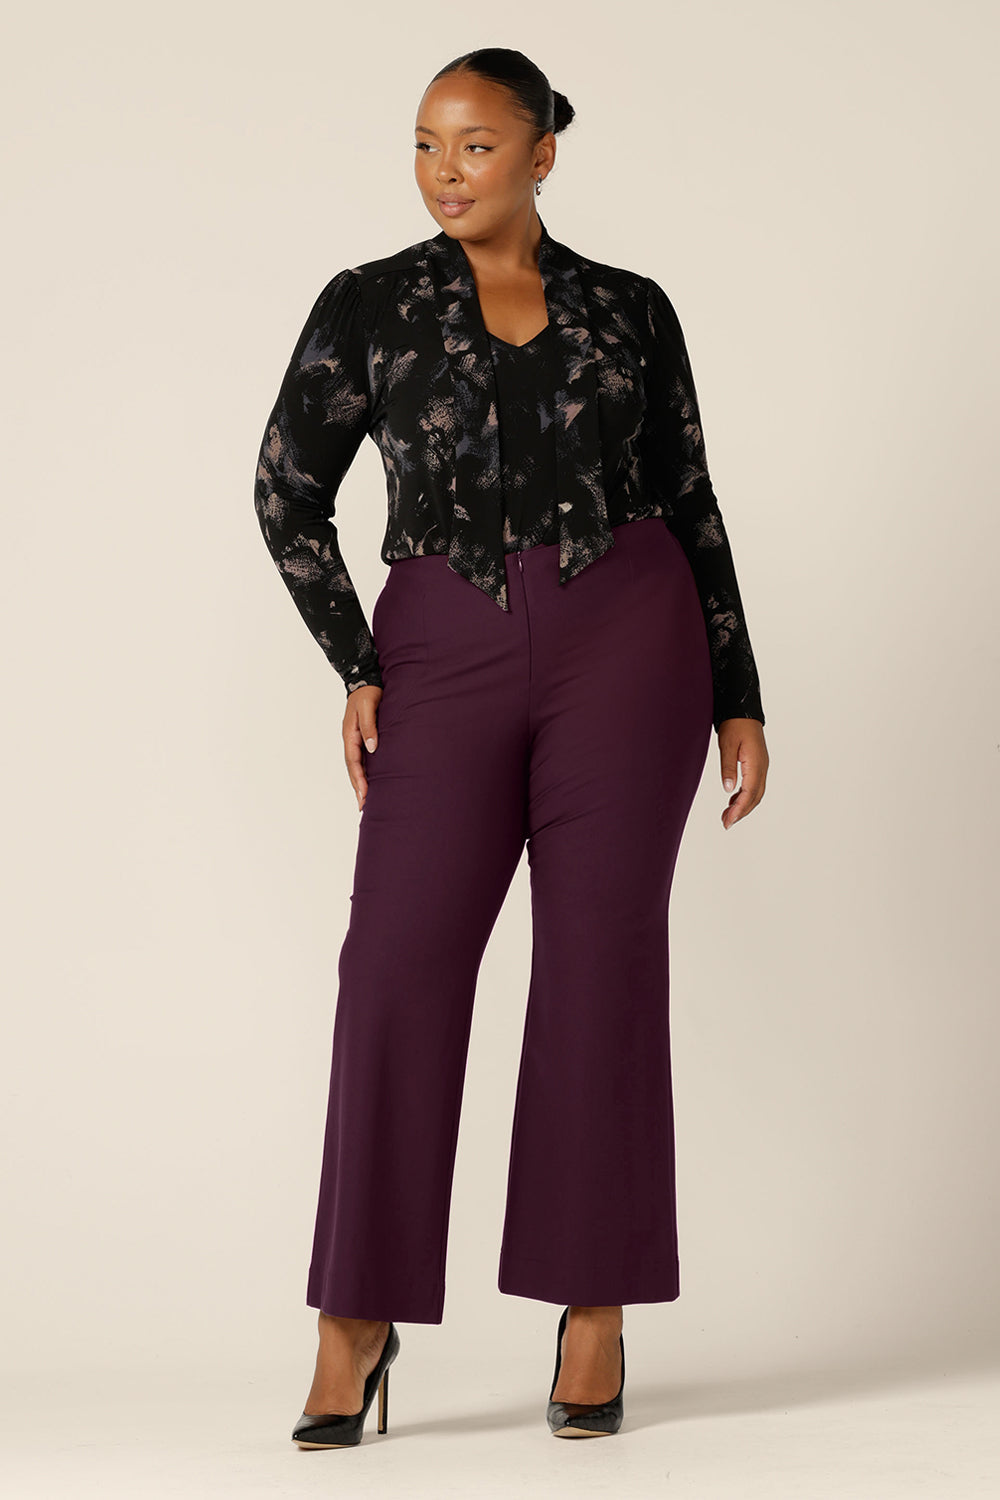 A plus size, size 18 woman wears a long sleeve, V-neck top with tie neck detail with flared leg, tailored pants in Mulberry. Both are by Australian and New Zealand women's clothing label, L&F and available to shop in sizes 8 to 24.